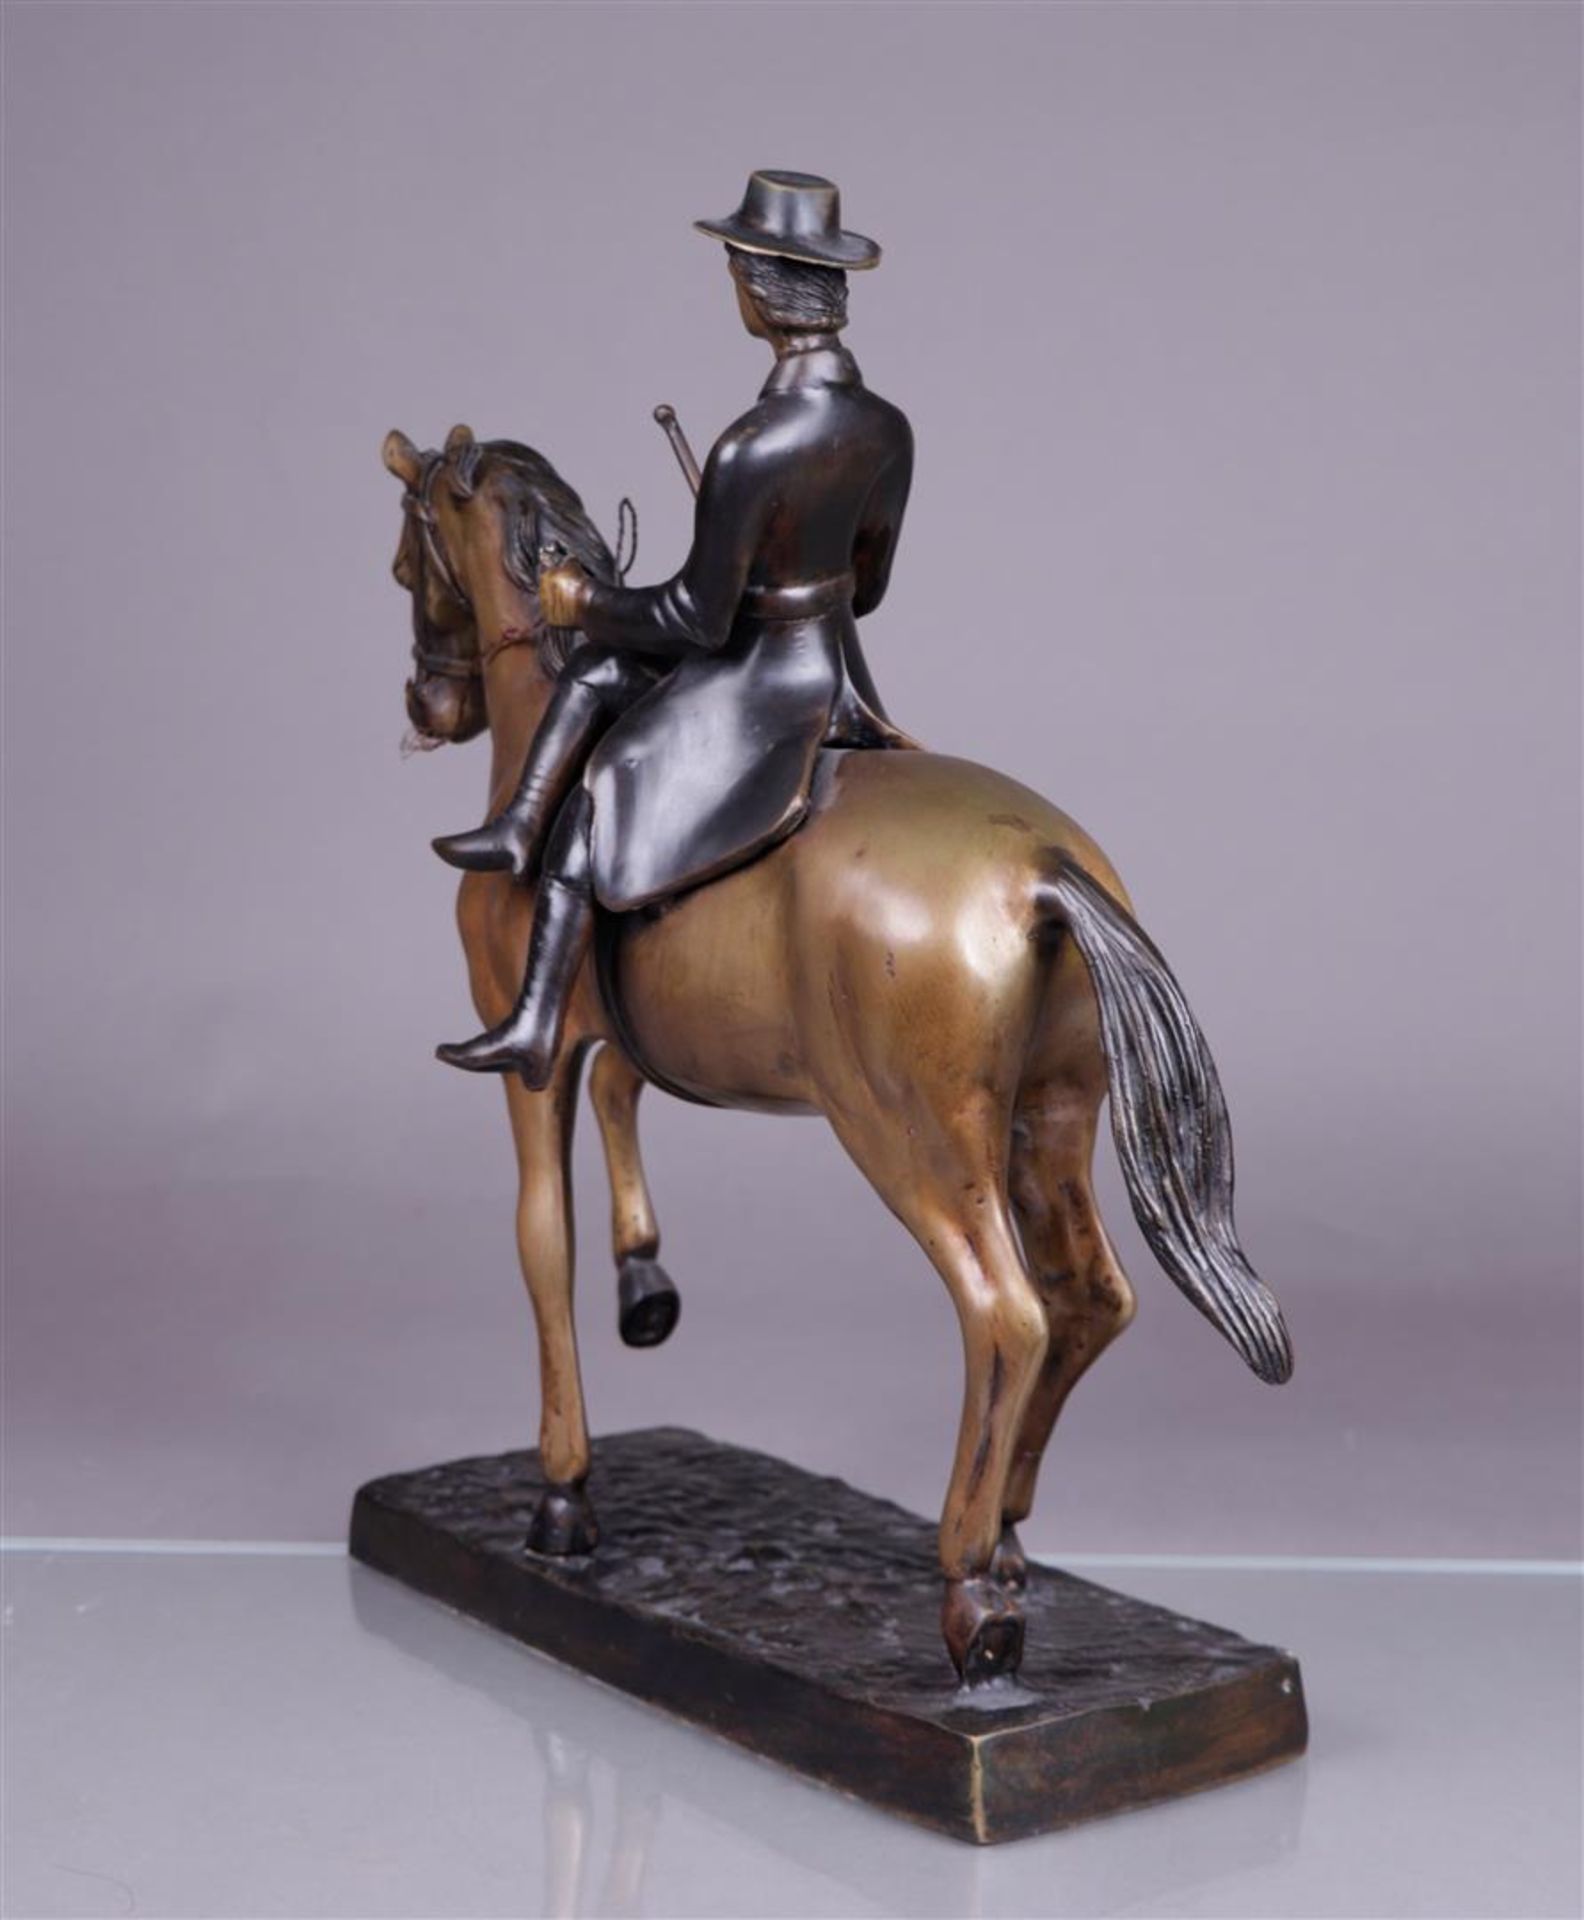 A bronze of an amazon on horseback, 20th century.
H.: 45 cm. - Image 3 of 3